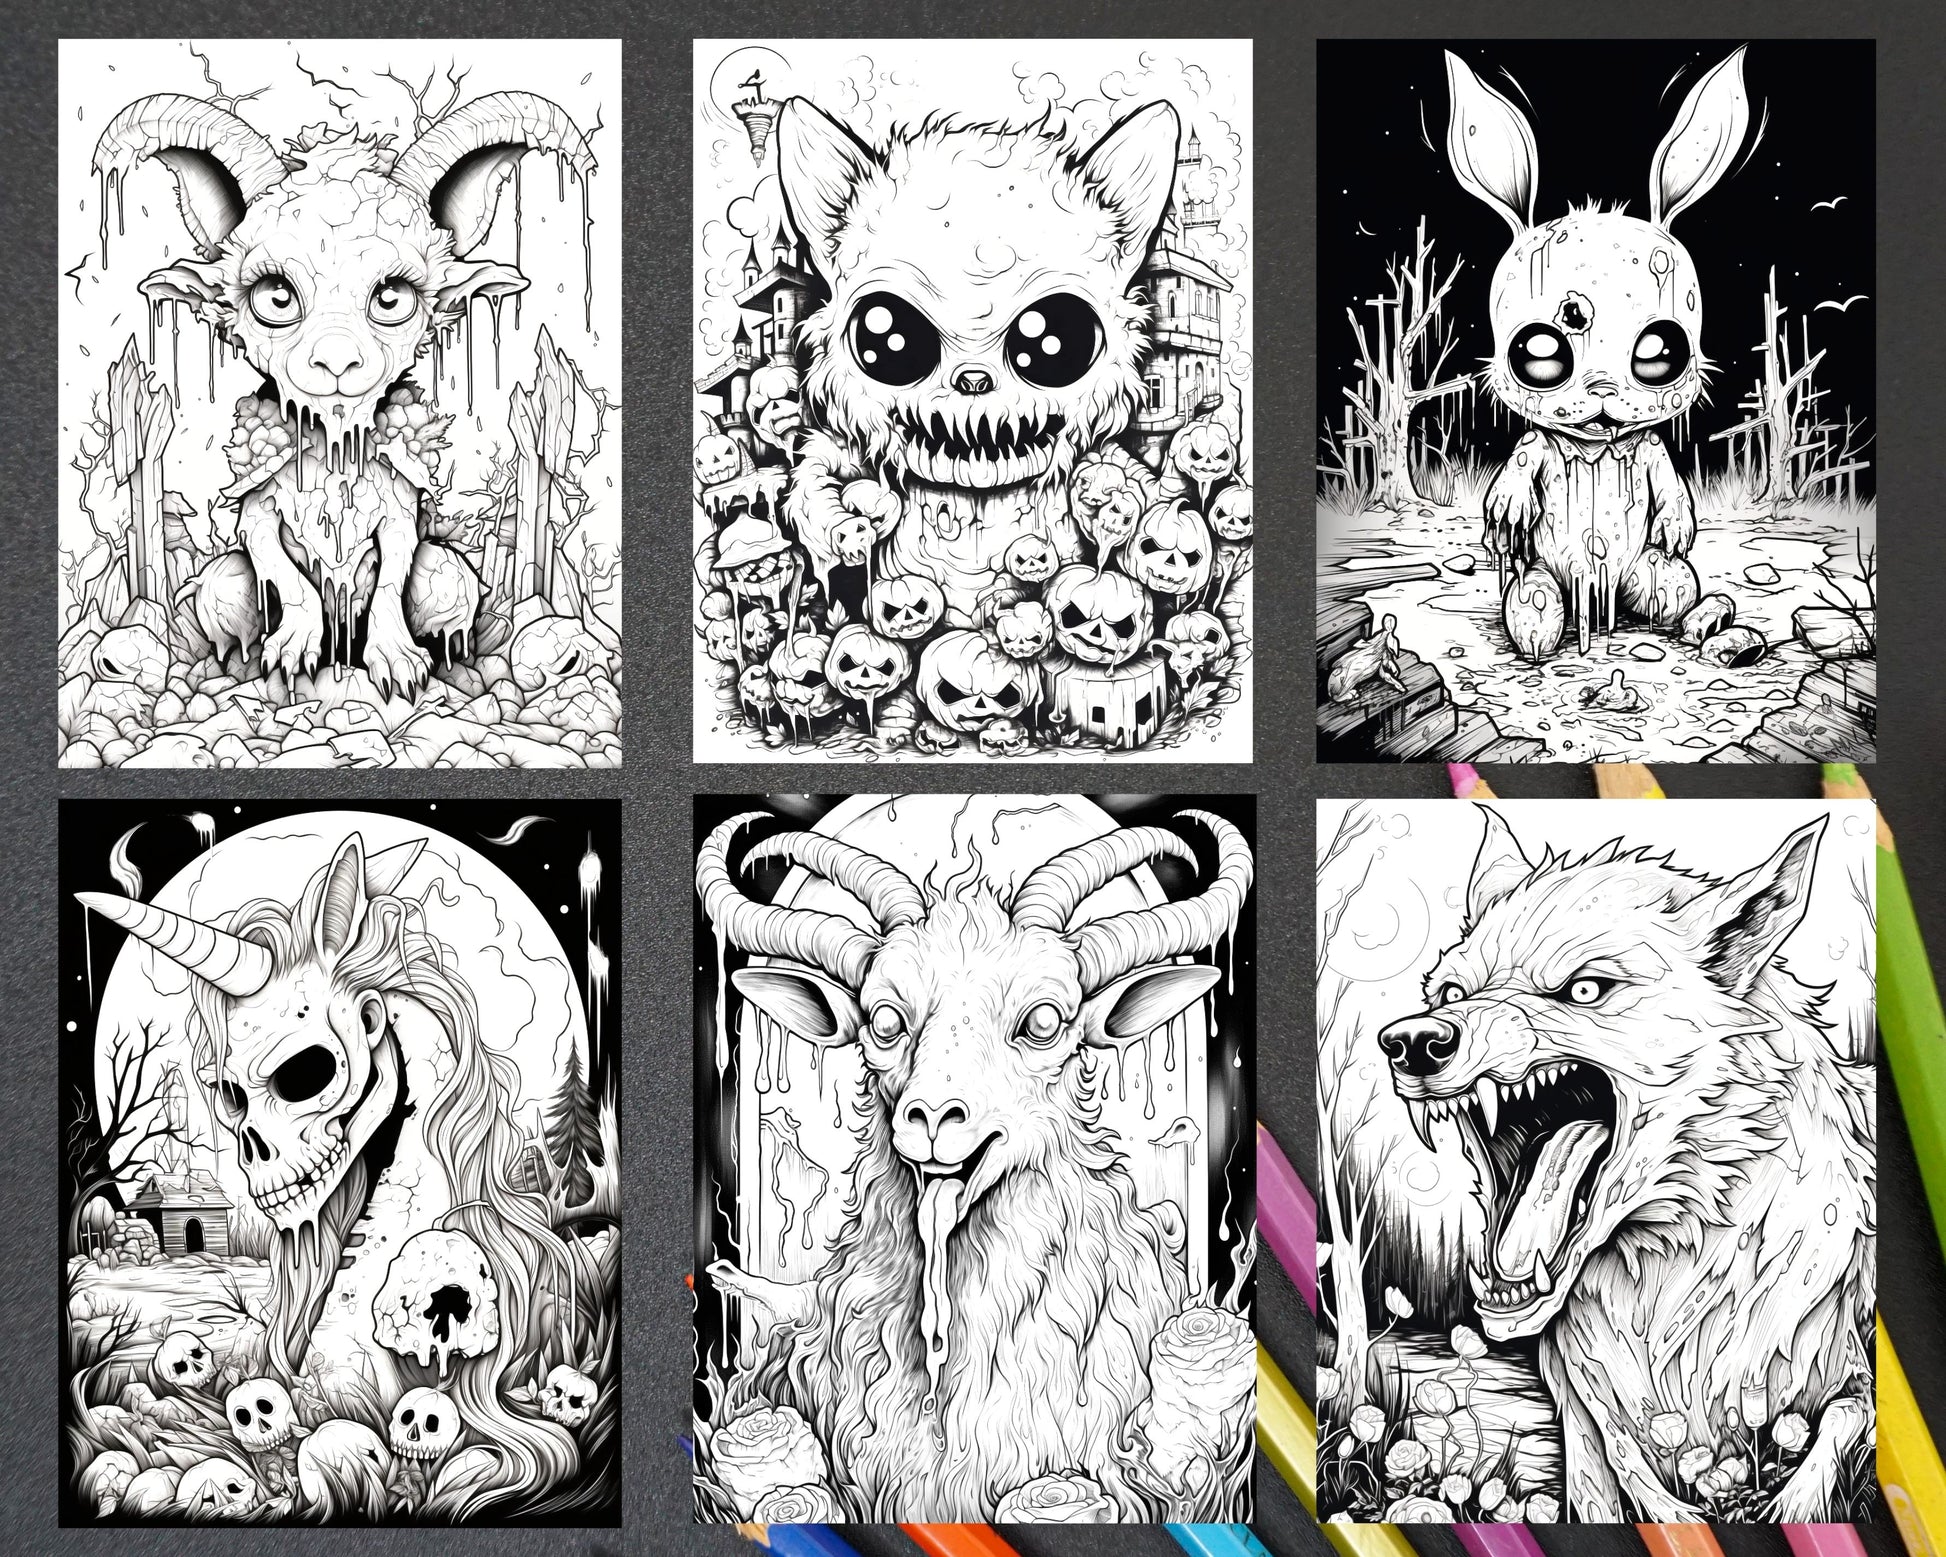 Halloween Scary Animals Grayscale Coloring Page, Halloween Coloring Pages for Adults, horror spooky coloring pages for adults